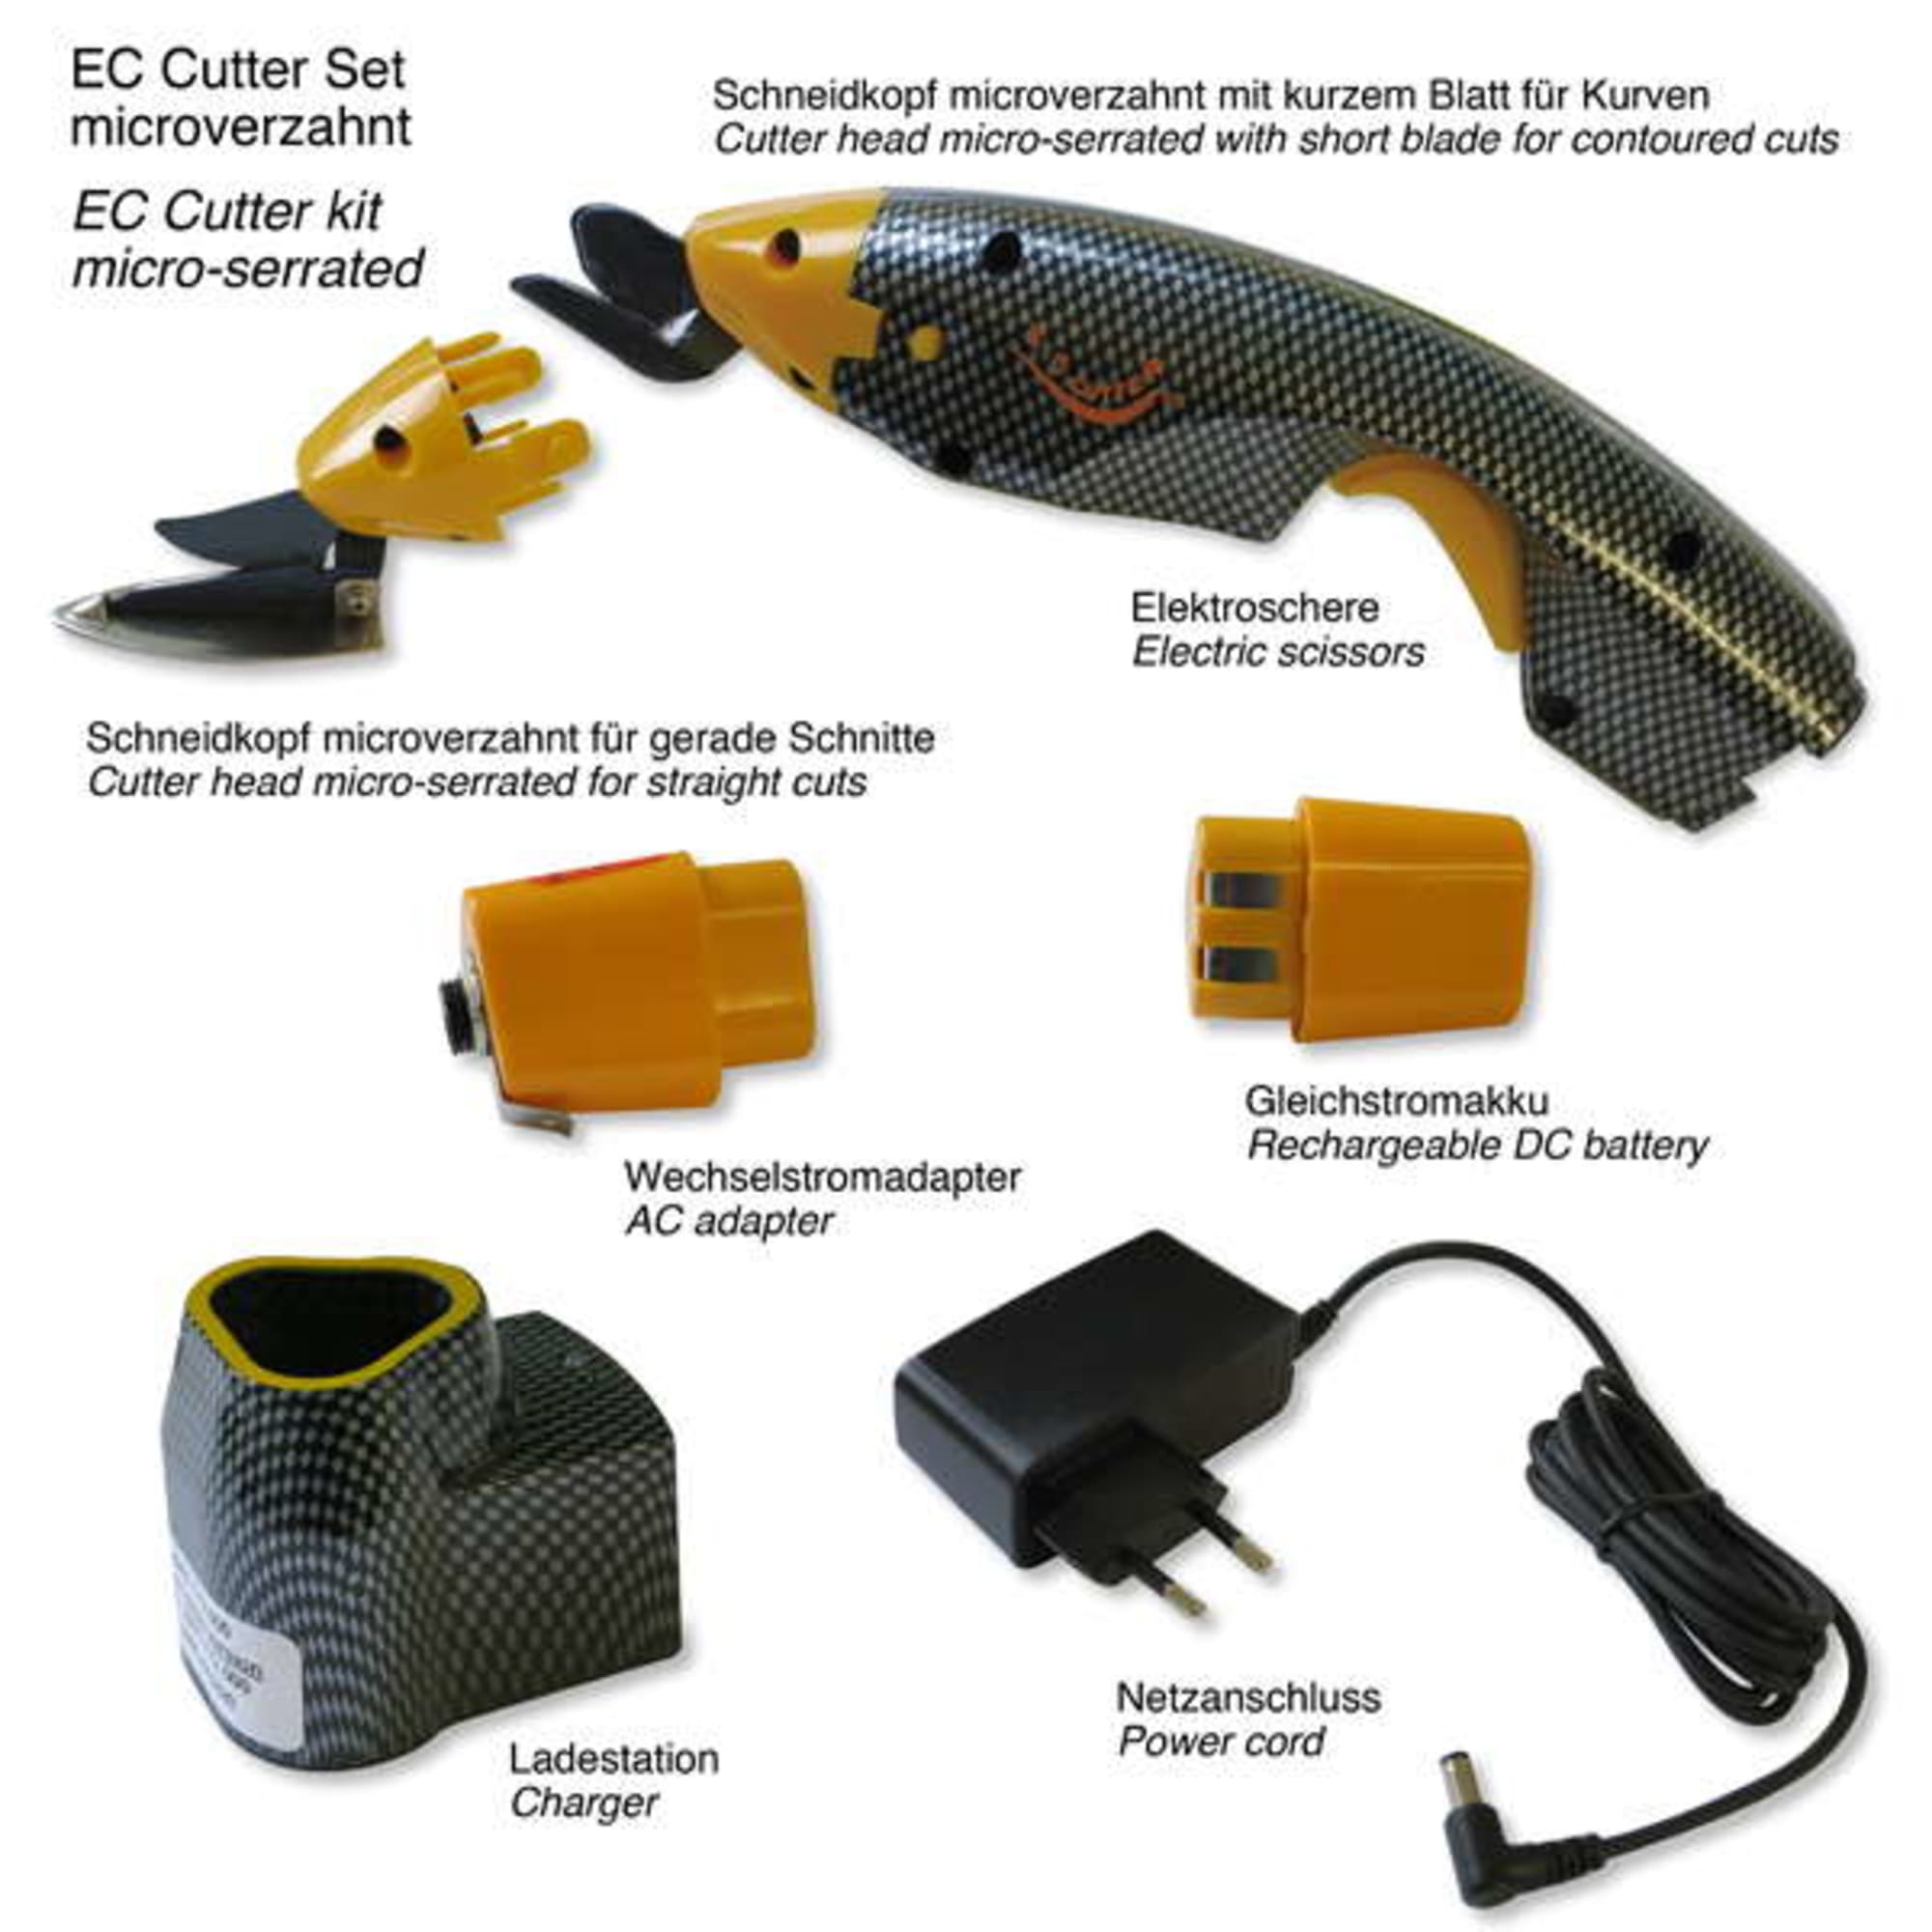 EC-Cutter kit with mirco-serrated cutter heads, image 2